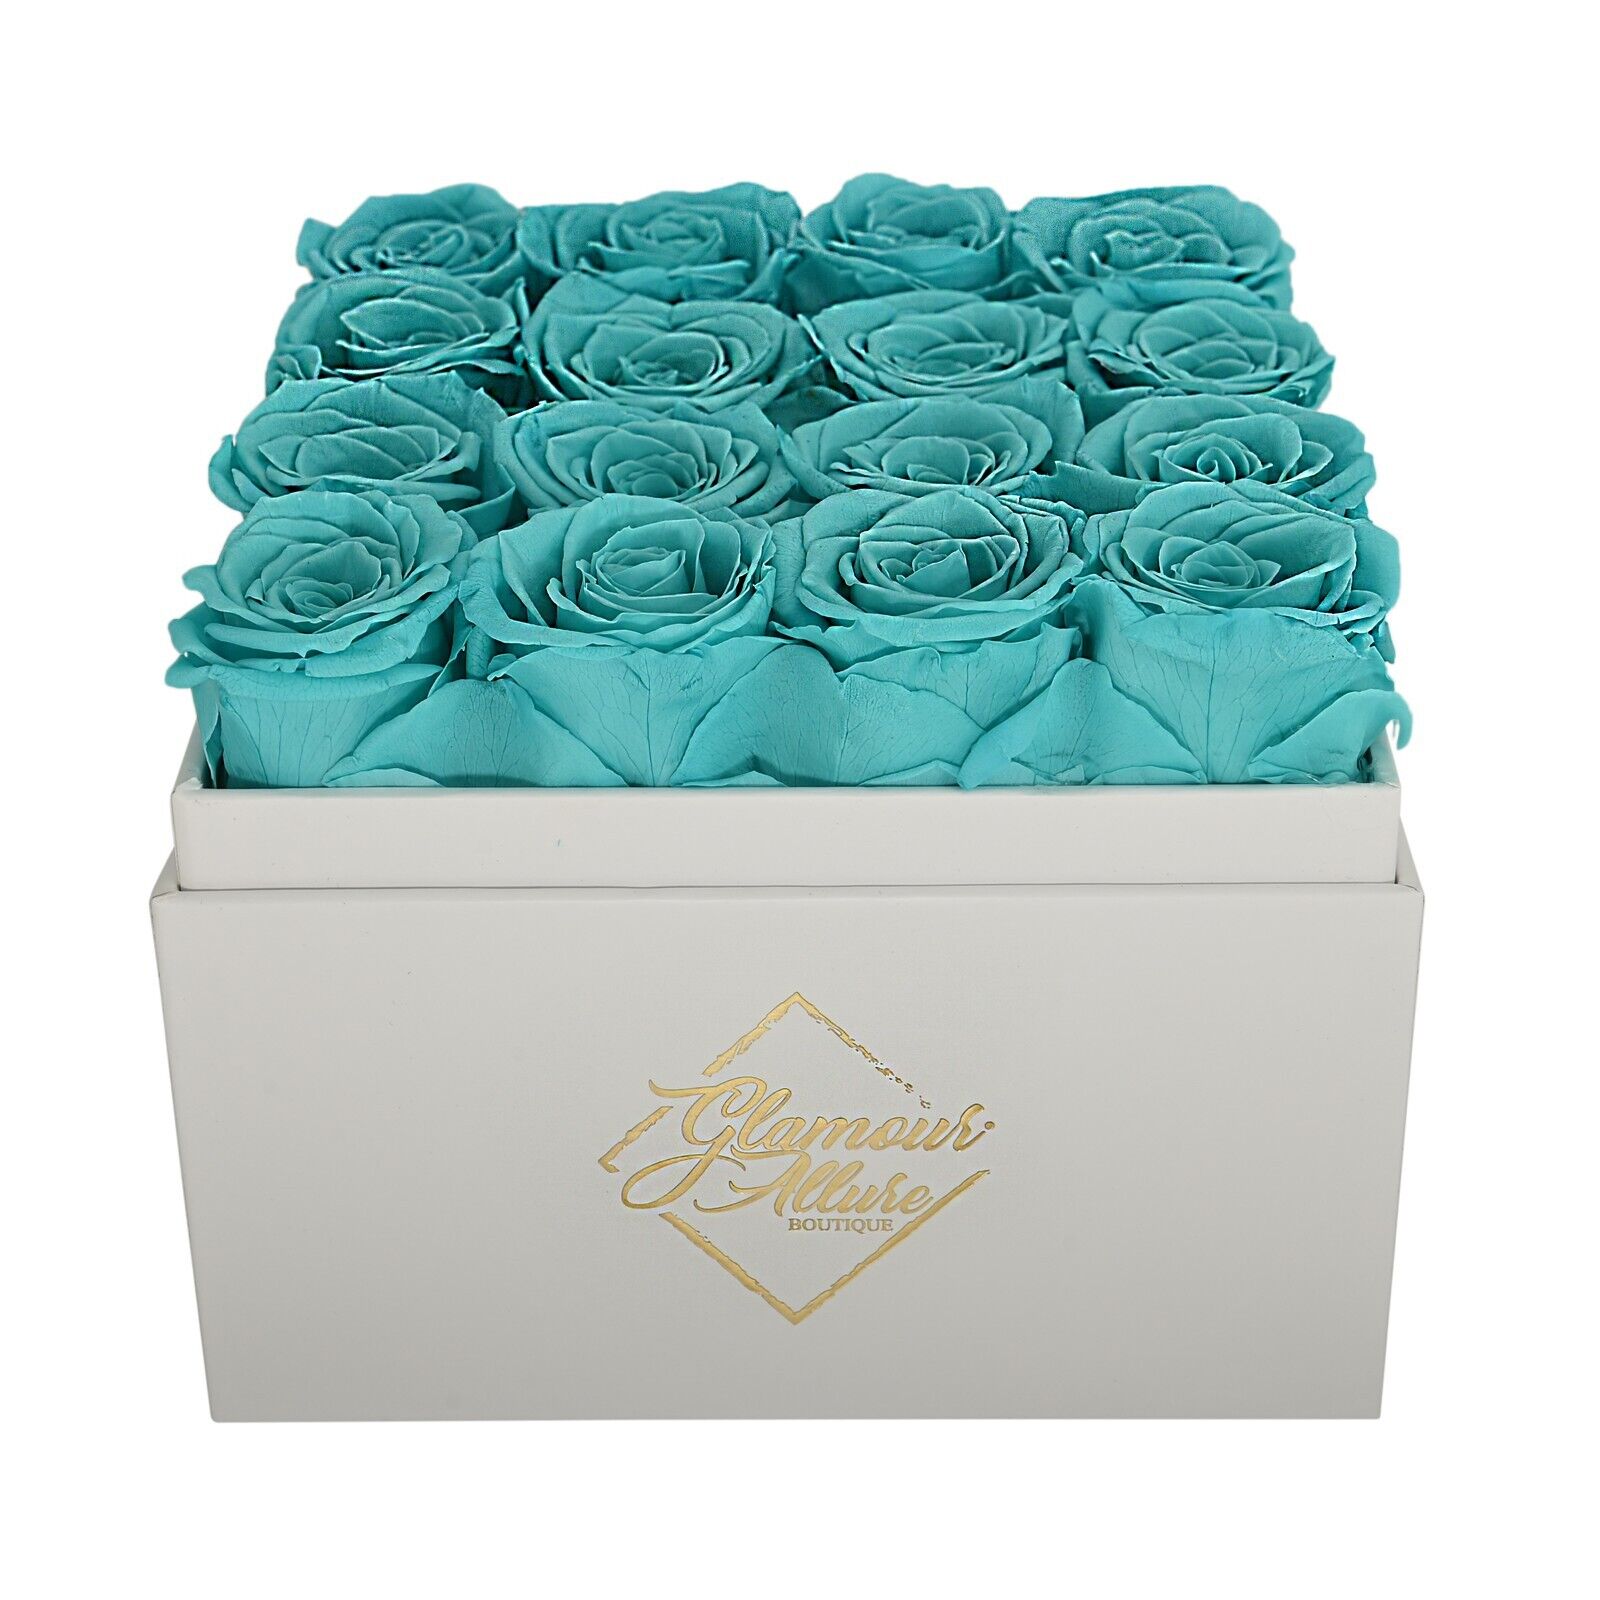 Handmade Preserved Real Roses in a Gift Box - 16 roses - Preserved Flowers Glamour Allure Boutoque - фотография #7